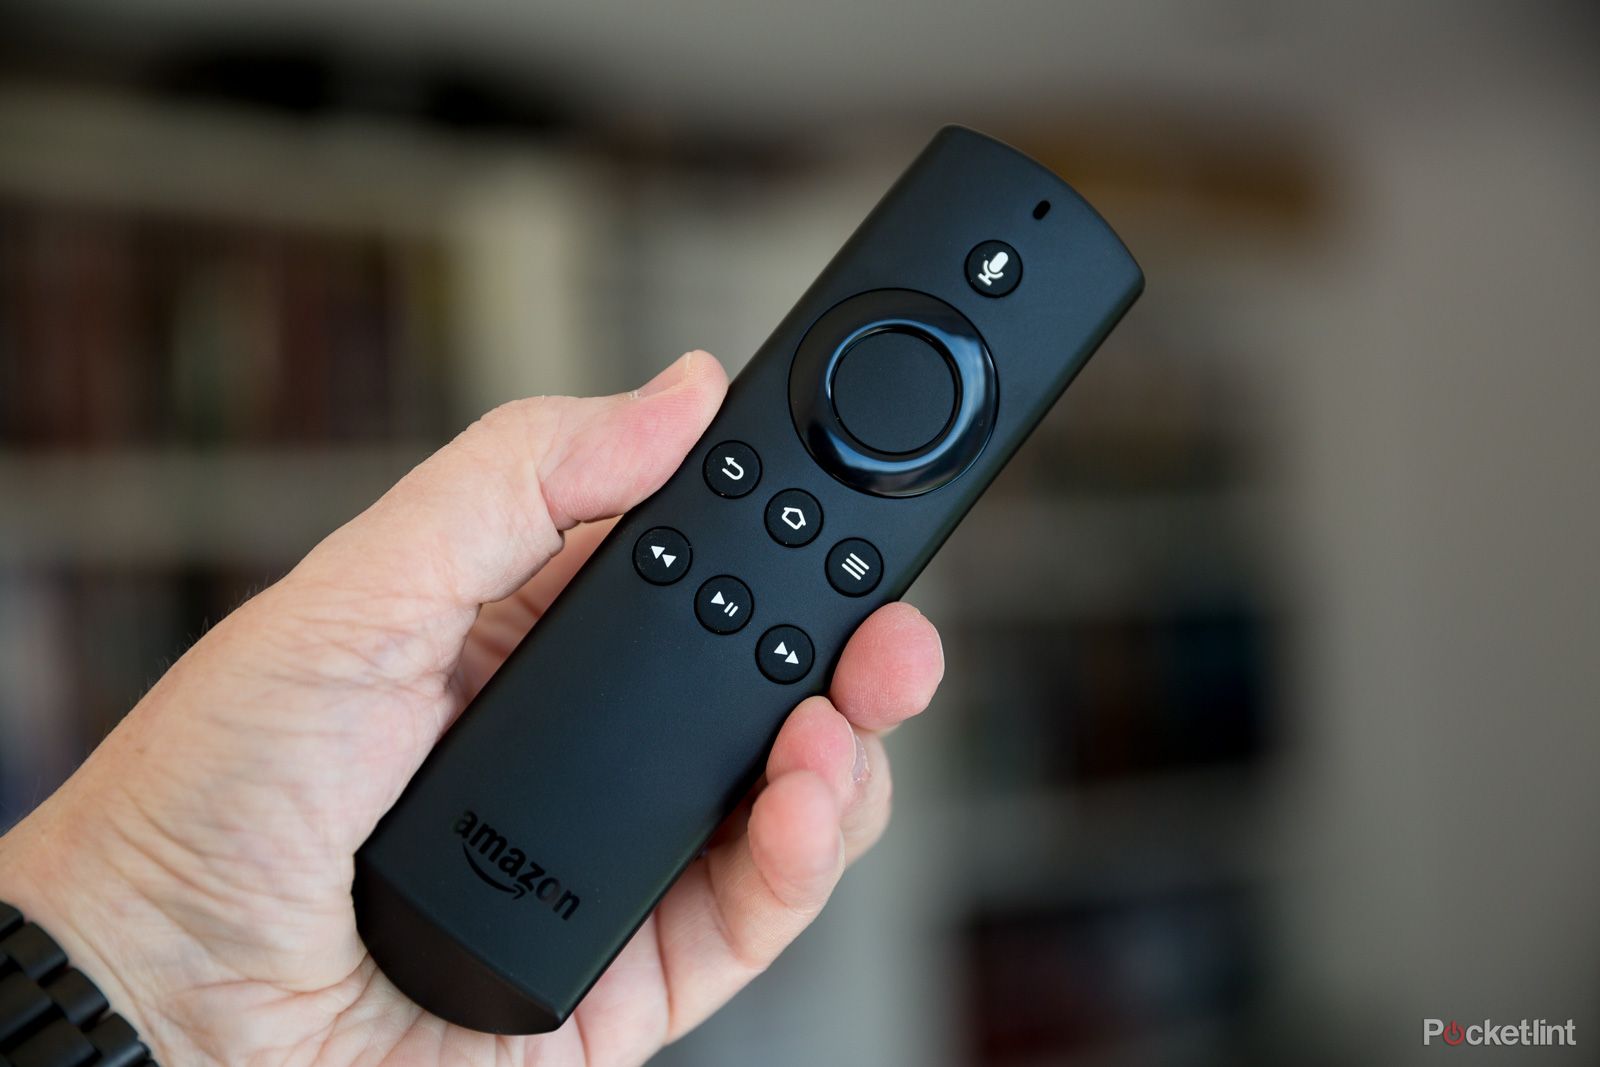 Amazon Fire TV Stick review: The best budget media player?